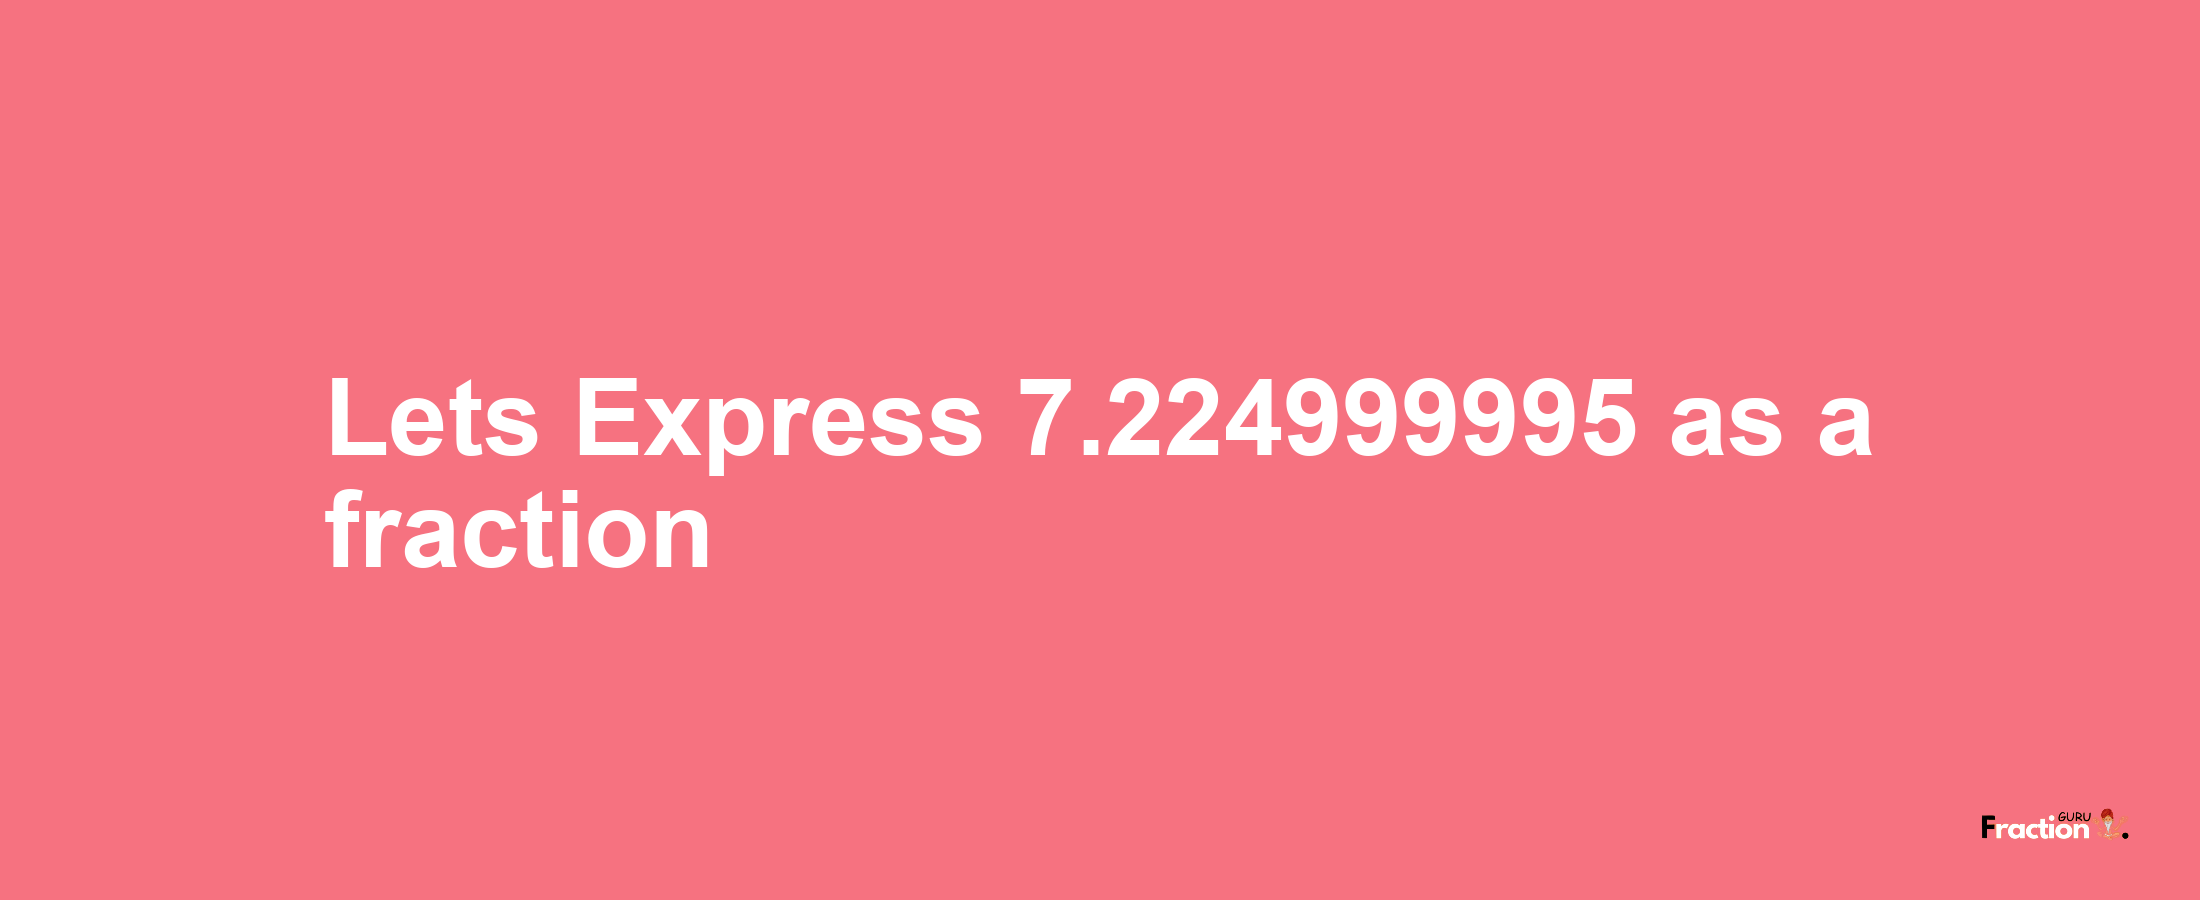 Lets Express 7.224999995 as afraction